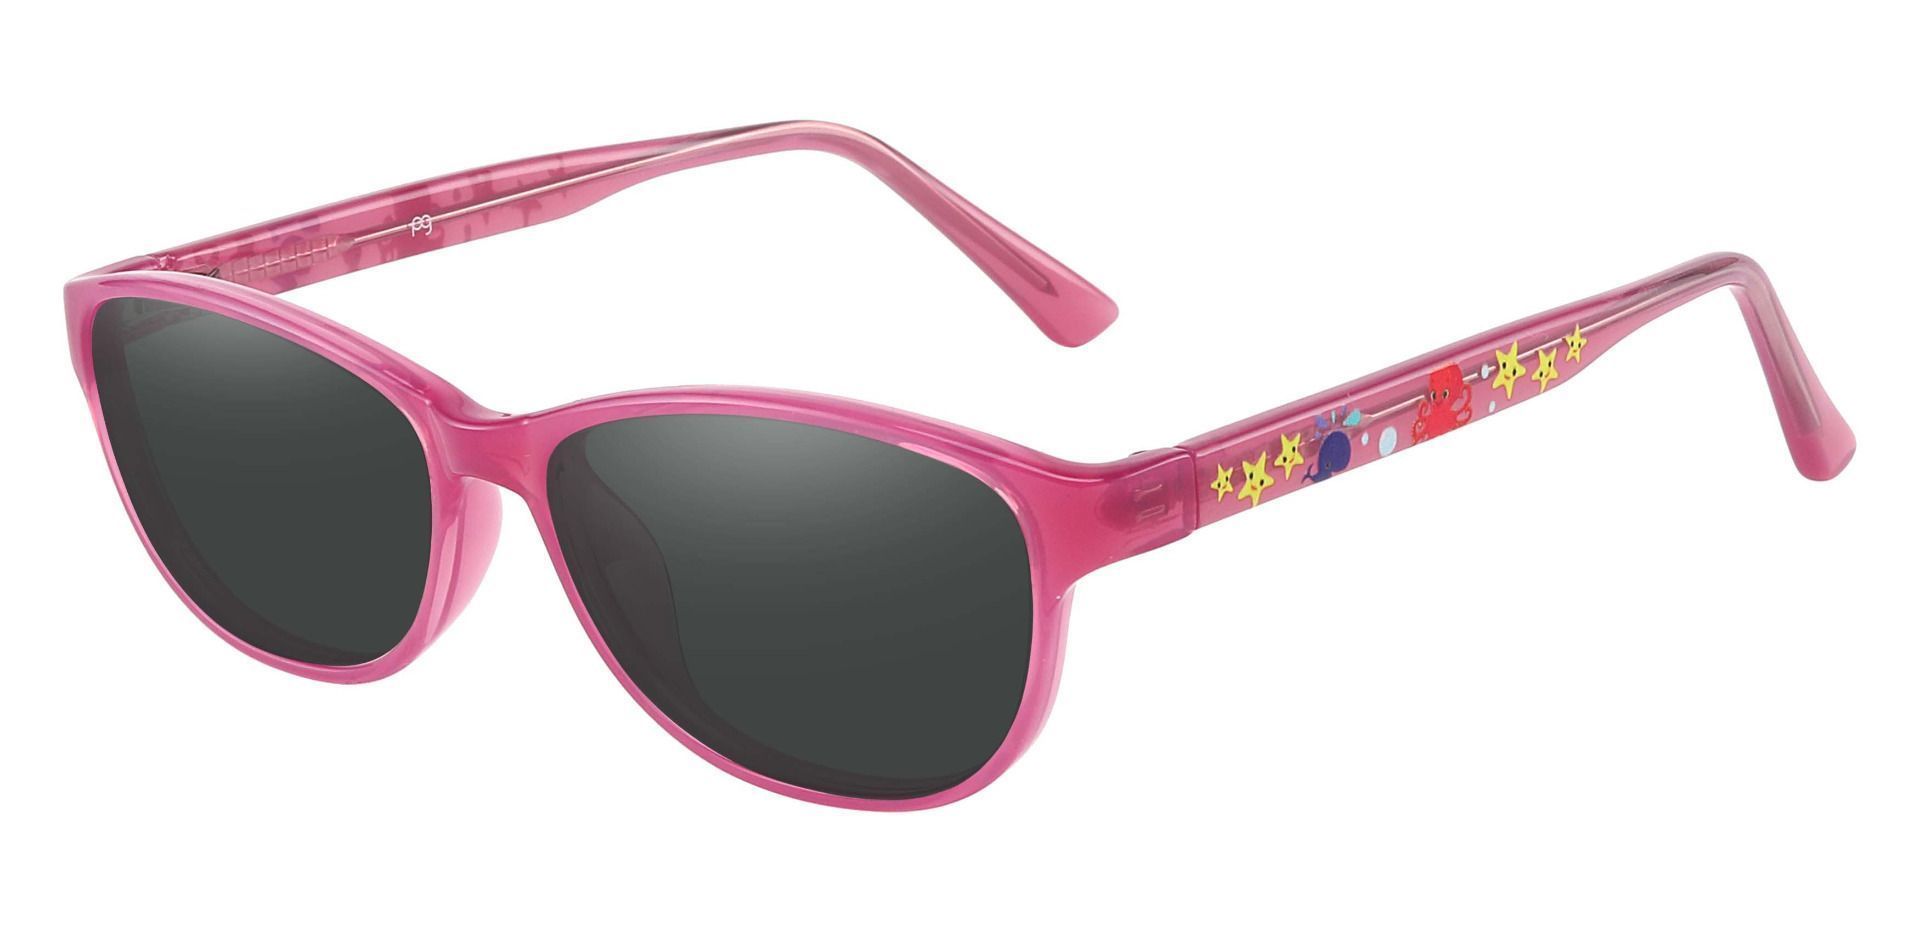 Patsy Oval Non-Rx Sunglasses - Pink Frame With Gray Lenses